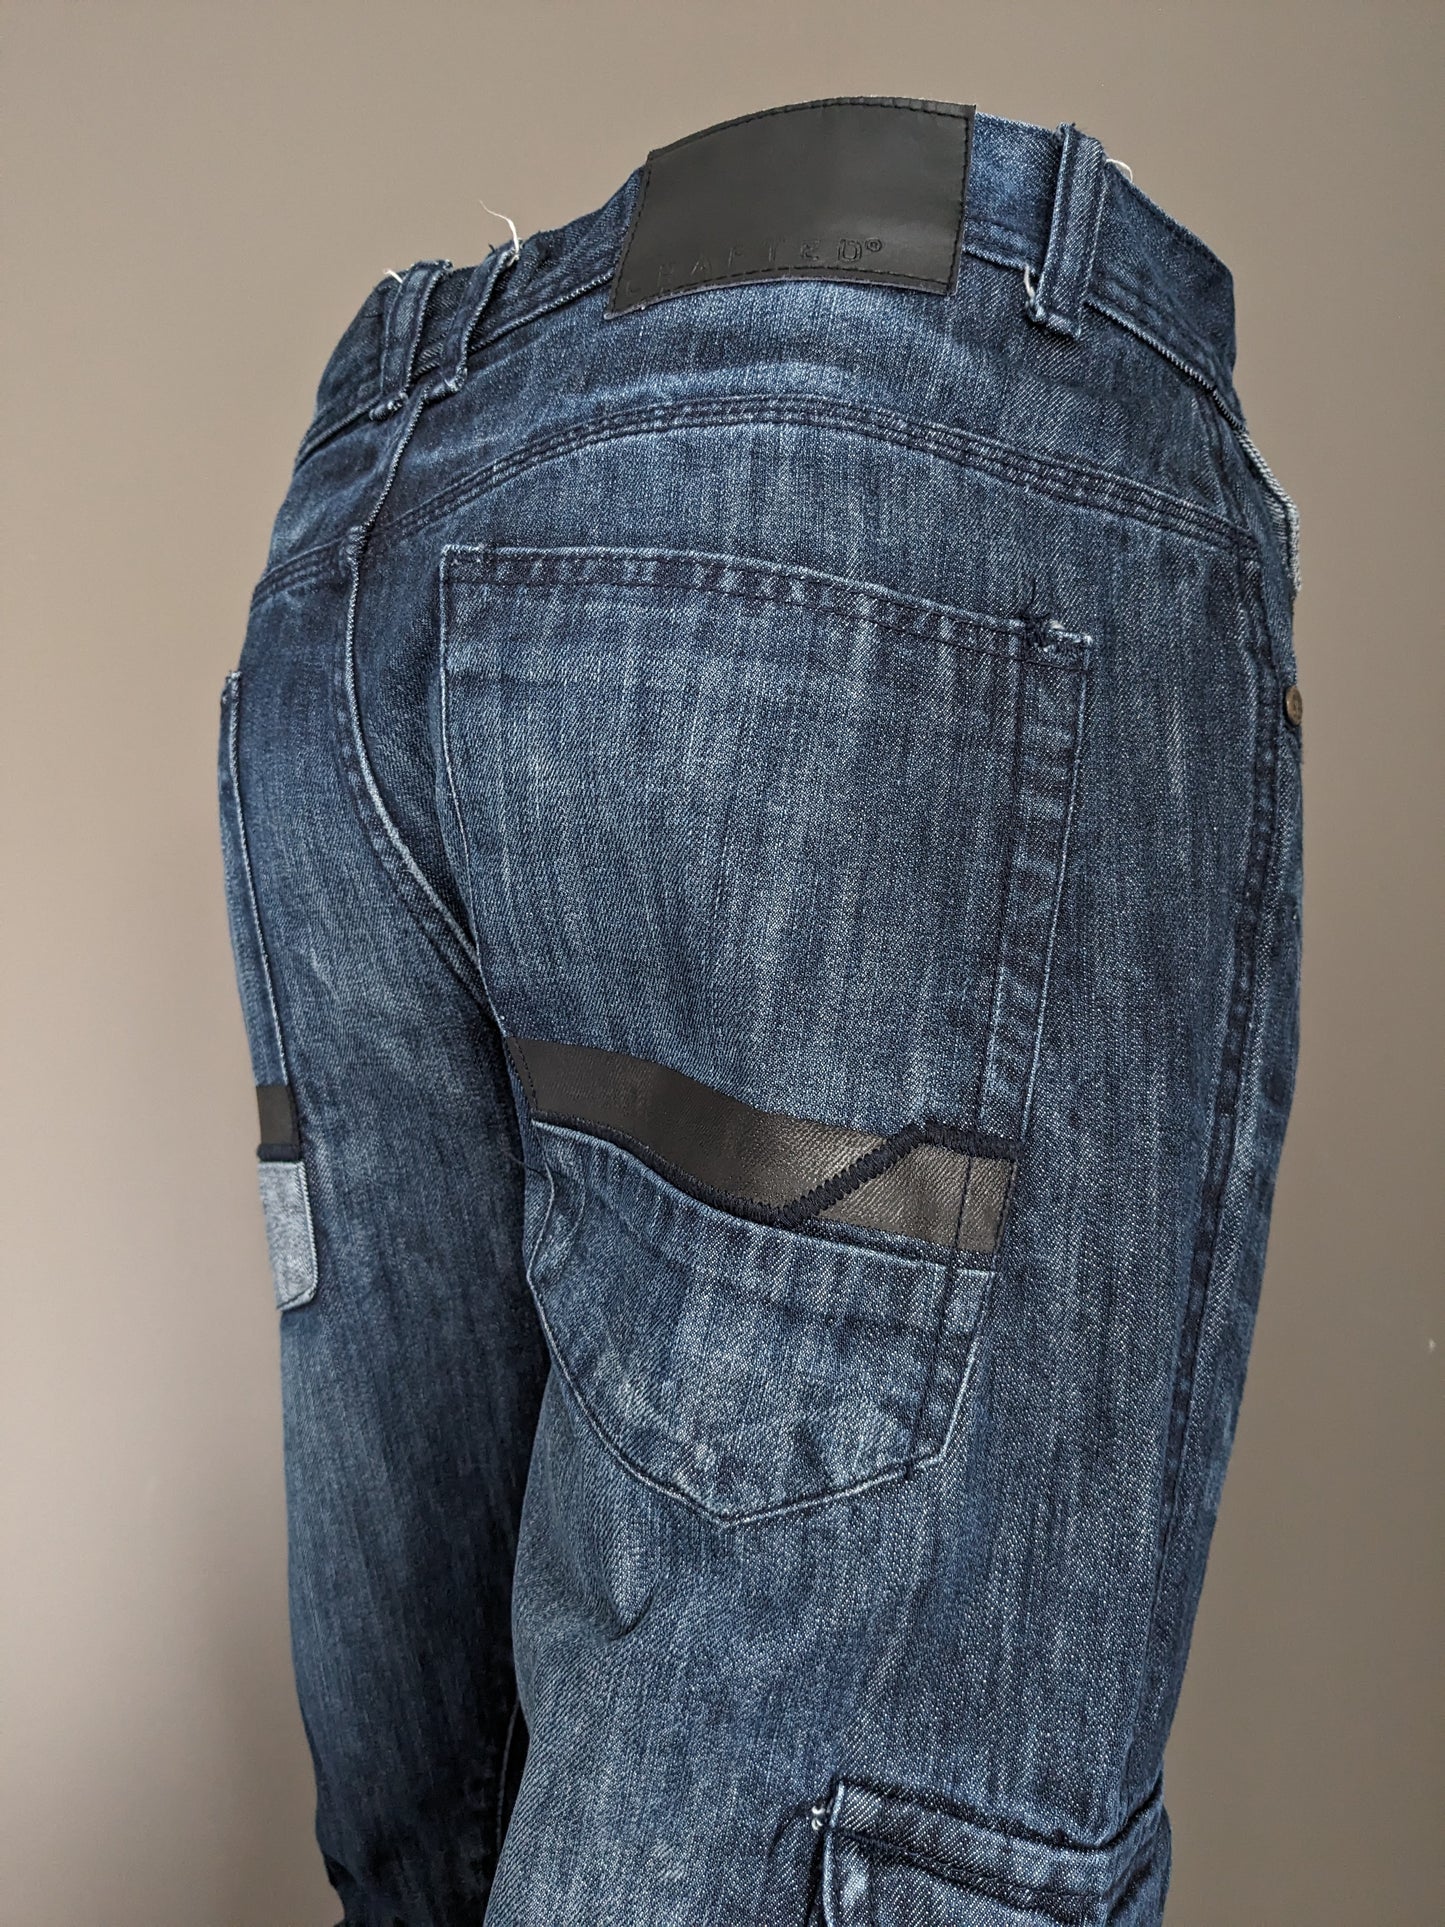 Crafted Jeans. Dark blue colored. Size W32 - L34.